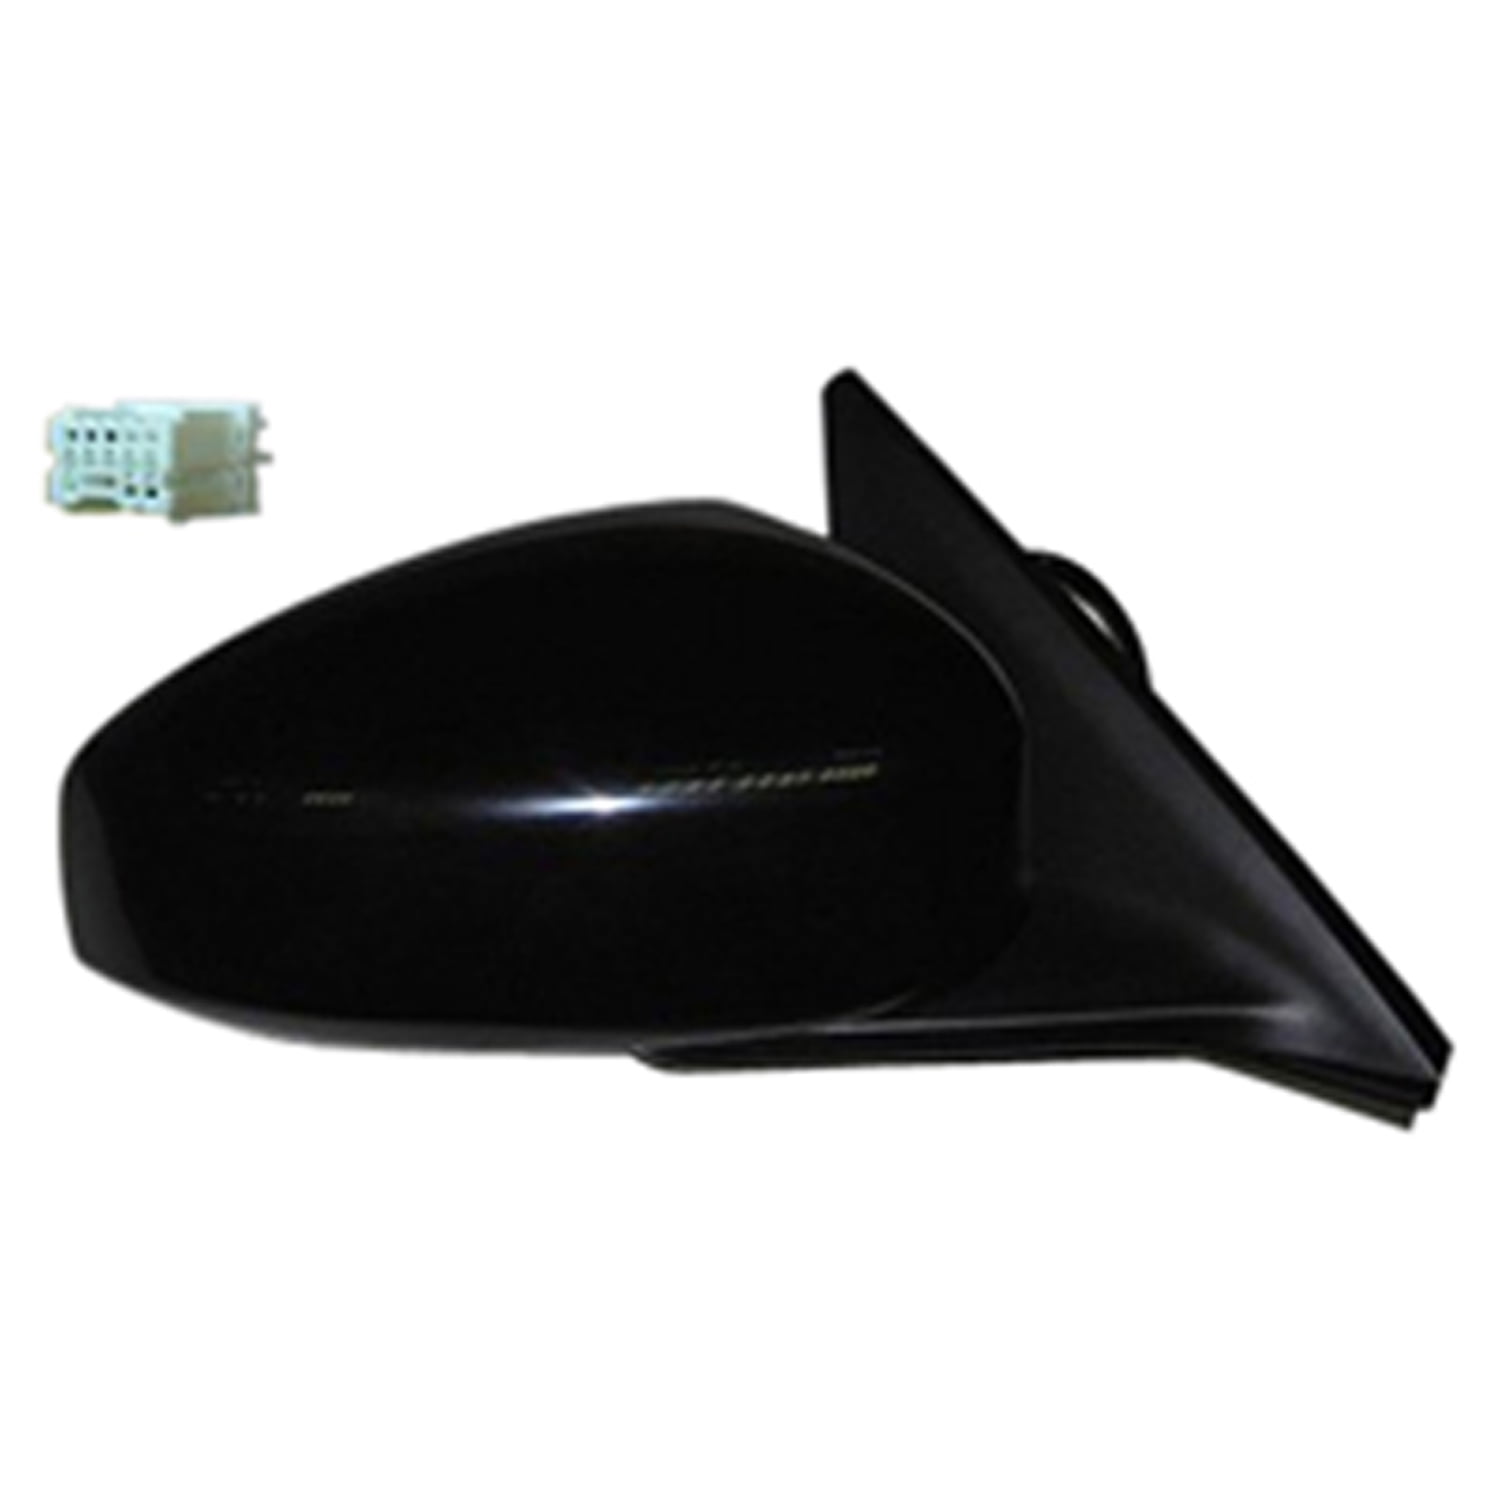 FOR 03-07 INFINITI G35 COUPE OE STYLE POWERED+HEATED LEFT SIDE VIEW DOOR MIRROR